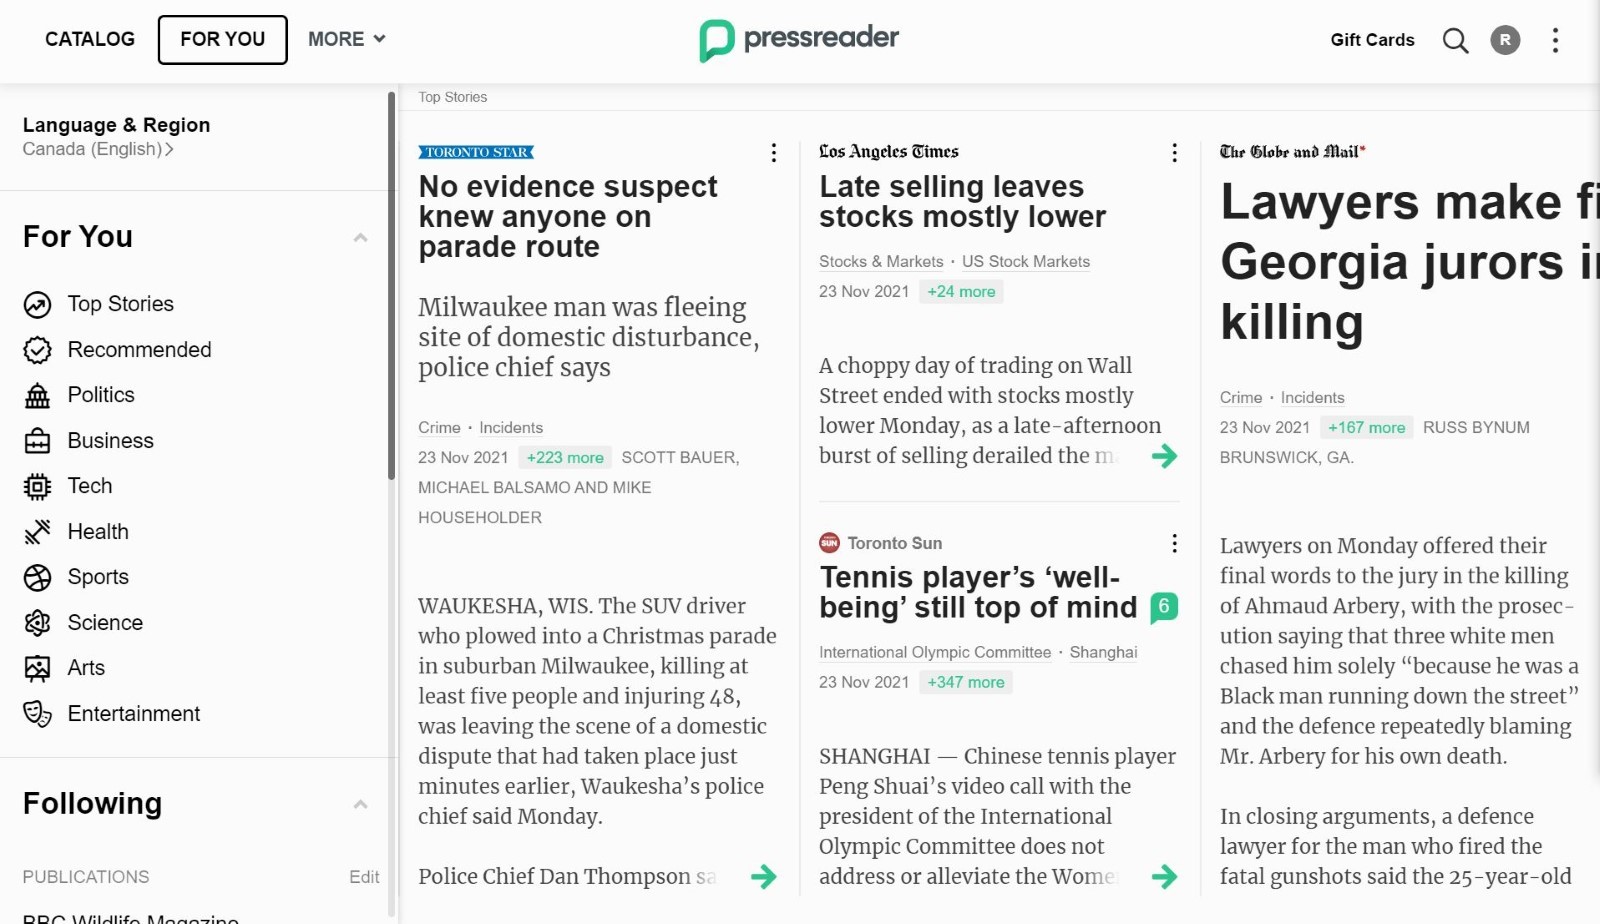 Taking time to add that special touch - PressReader